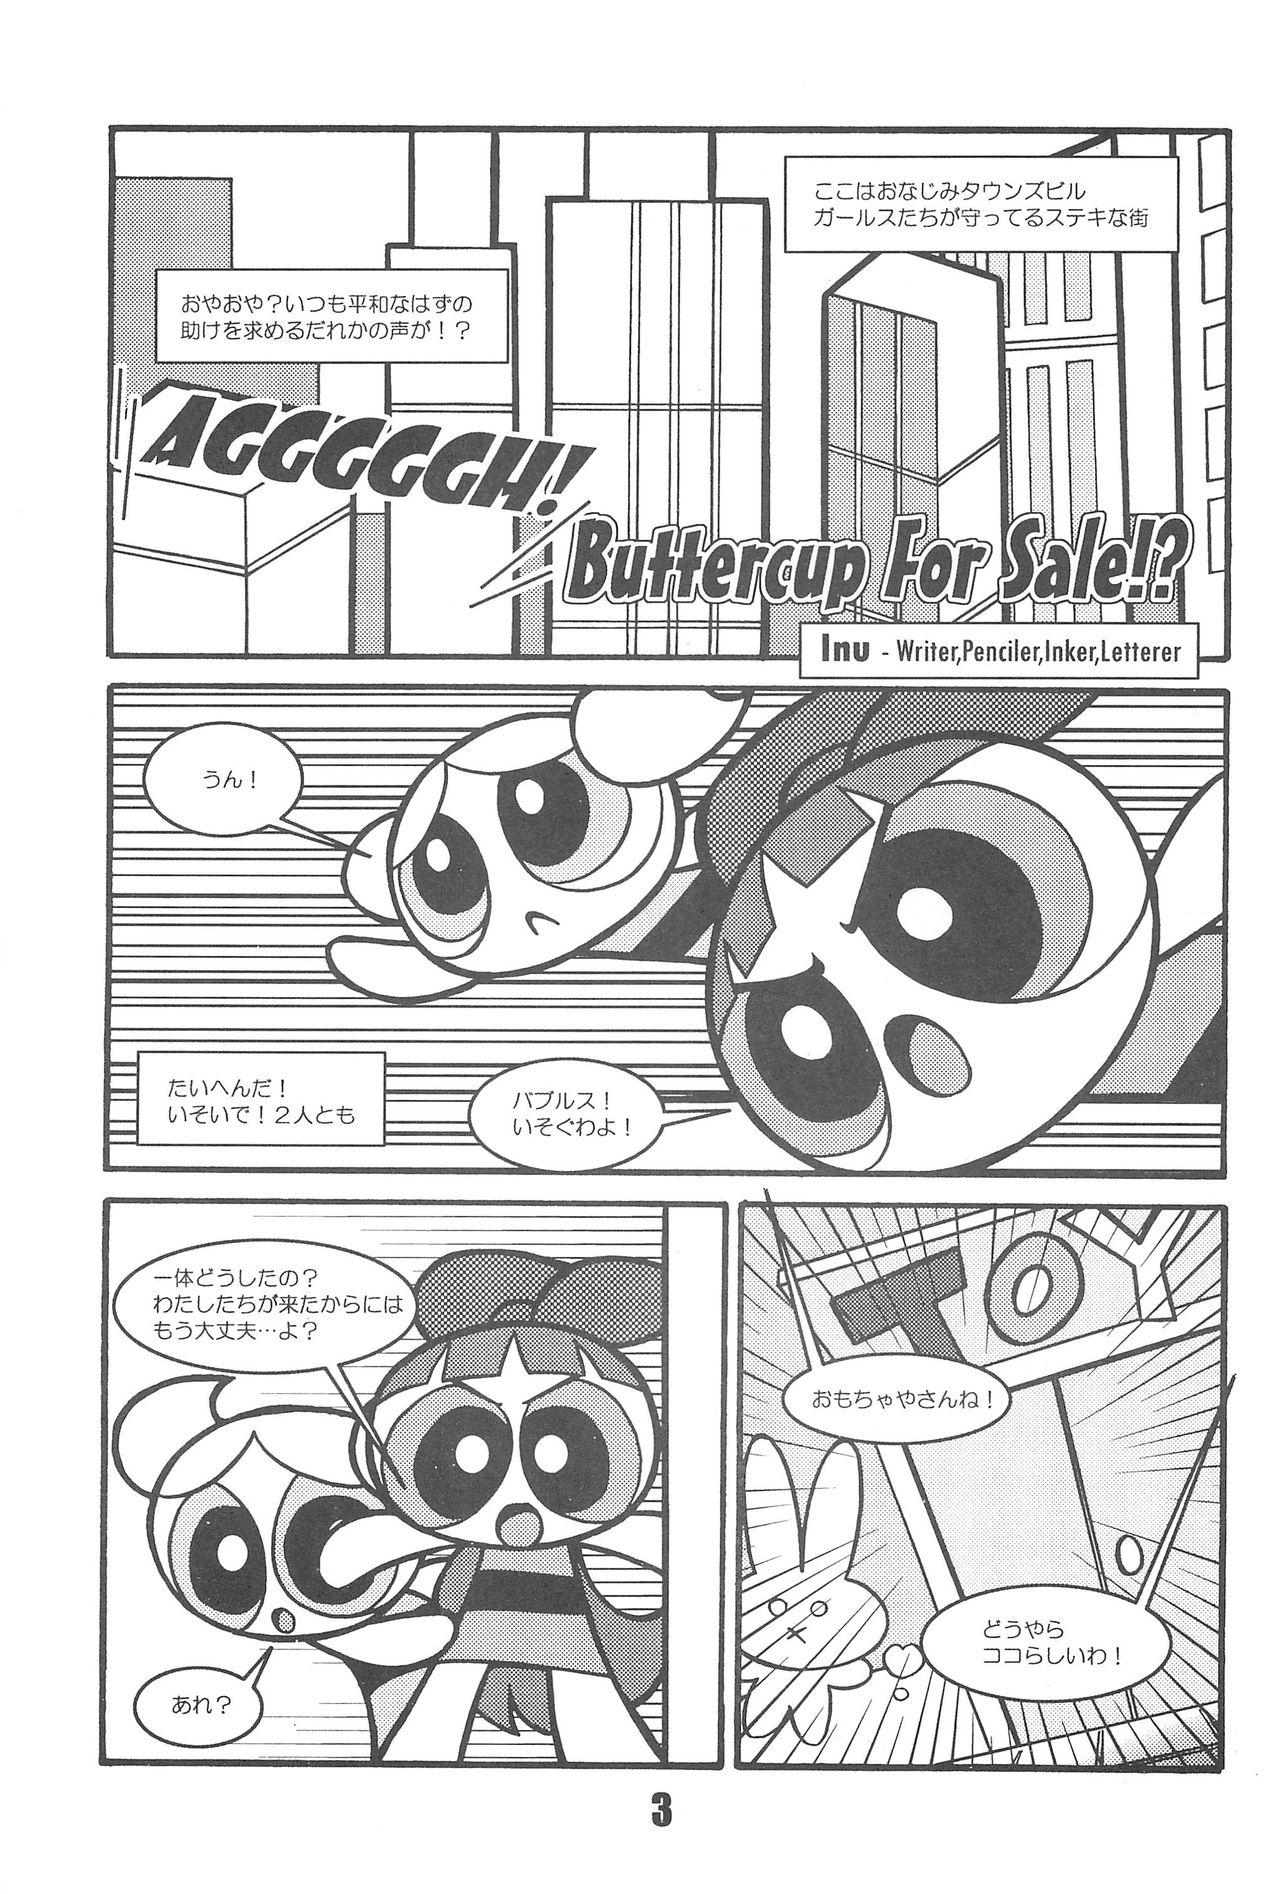 Spy Show Goes On! Funhouse 22th - The powerpuff girls Ameture Porn - Page 3